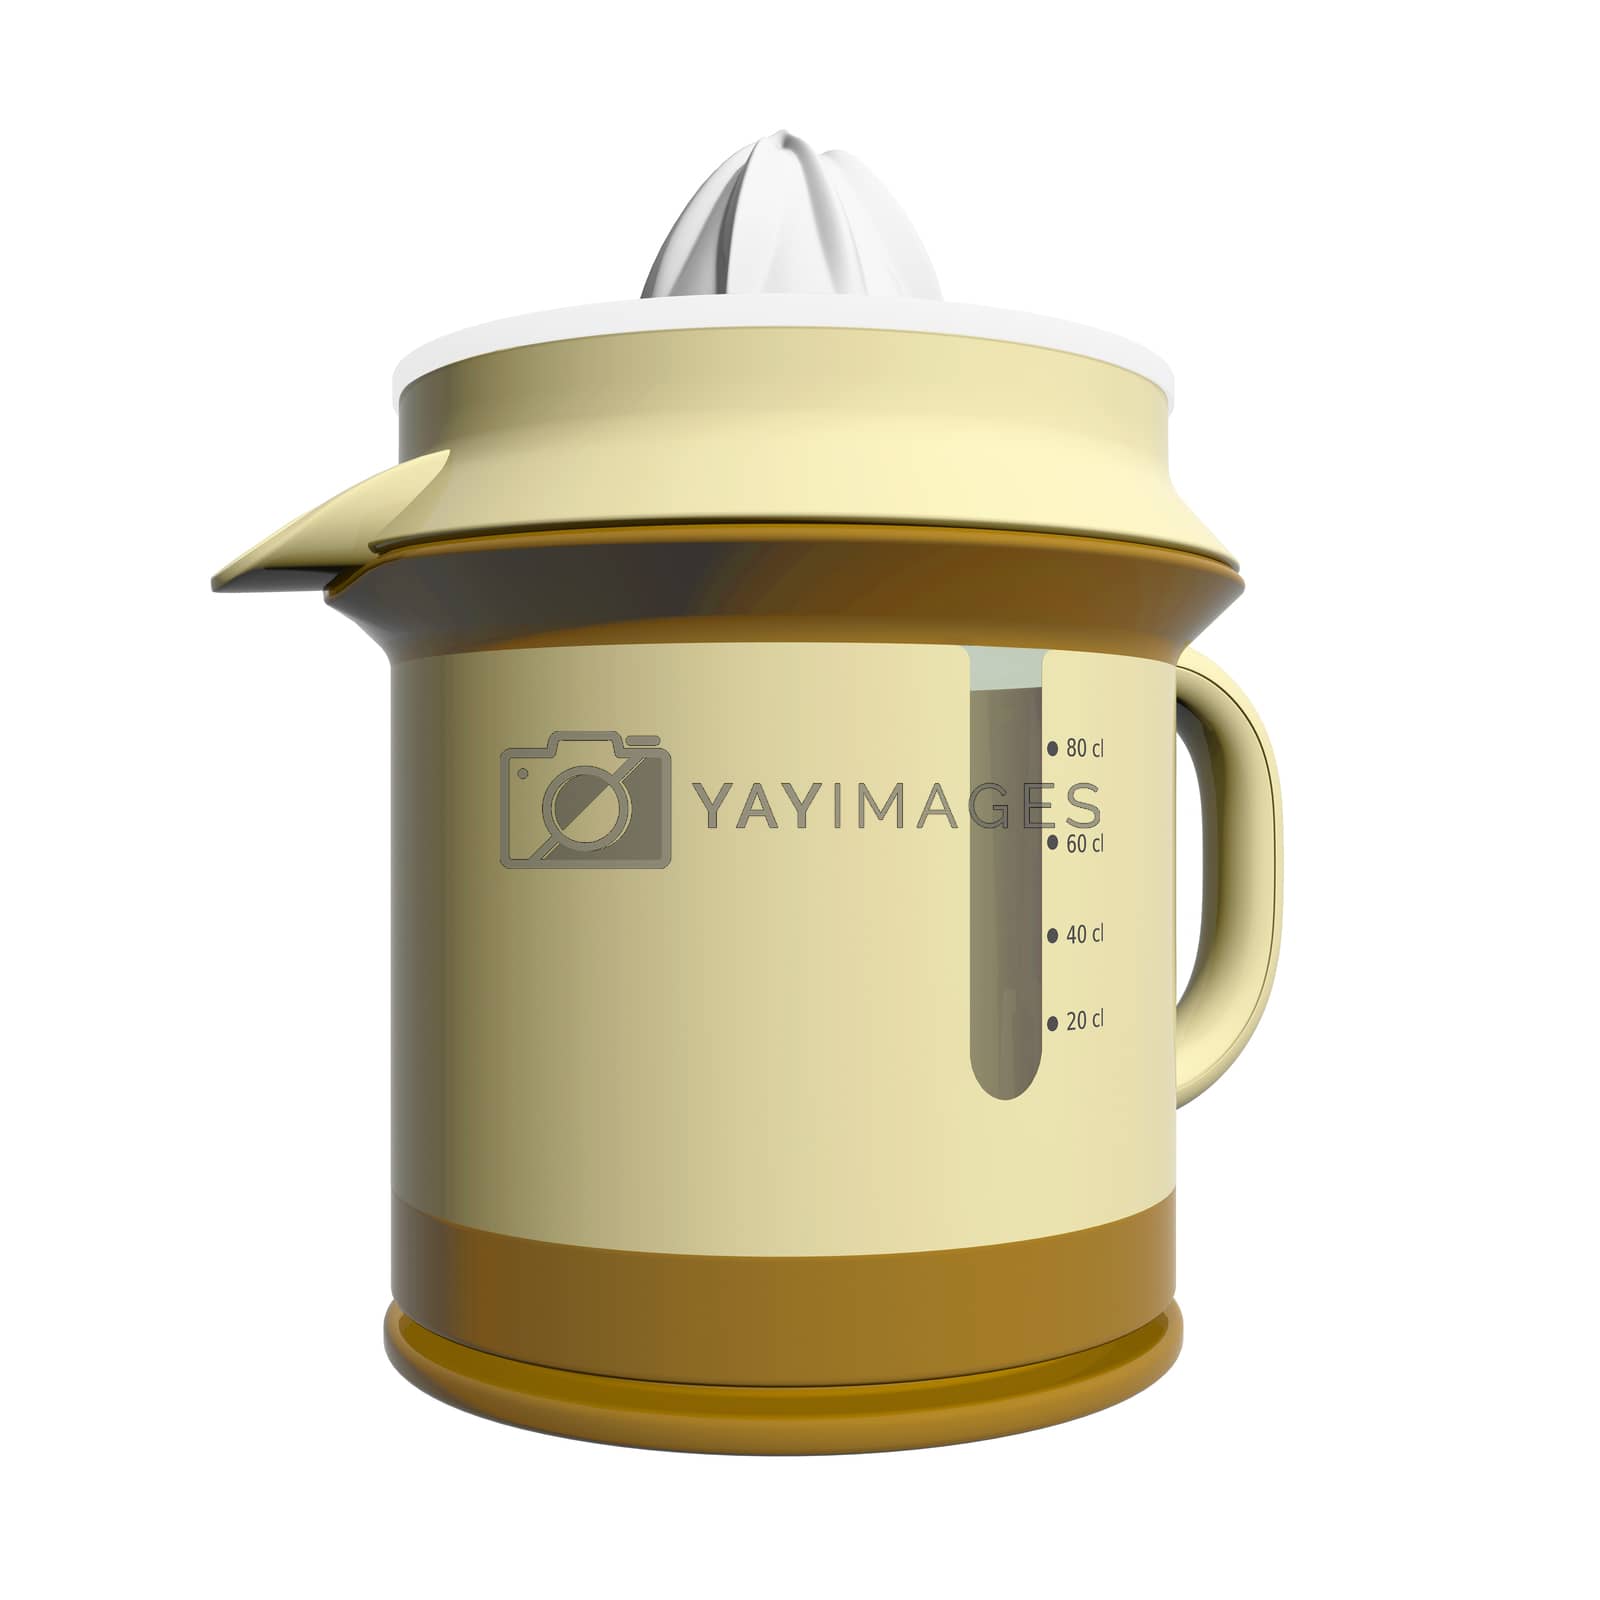 Royalty free image of Combination juicer and pitcher, brown and yellow, plastic, 3D il by Morphart